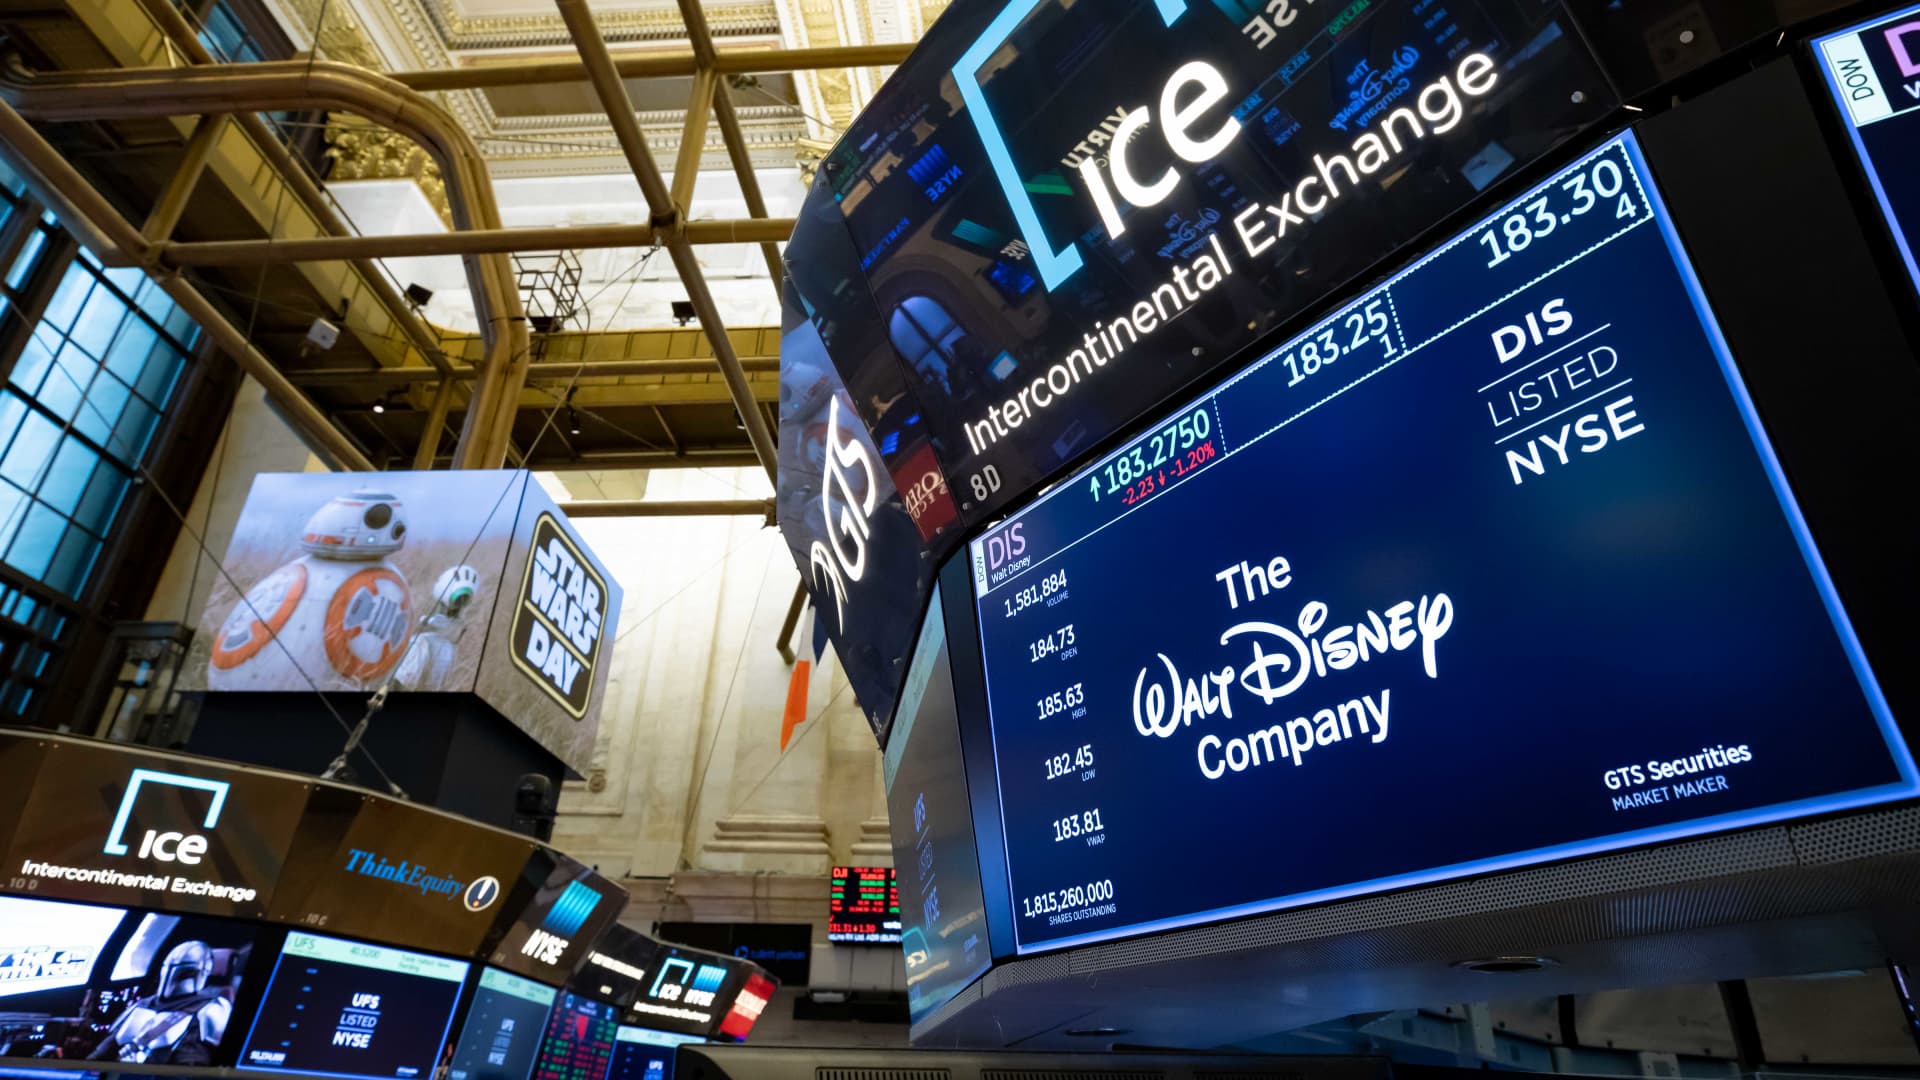 The New York Stock Exchange welcomes The Walt Disney Company (NYSE: DIS), on Tuesday, May 4, 2021, in honor of Star Wars Day.